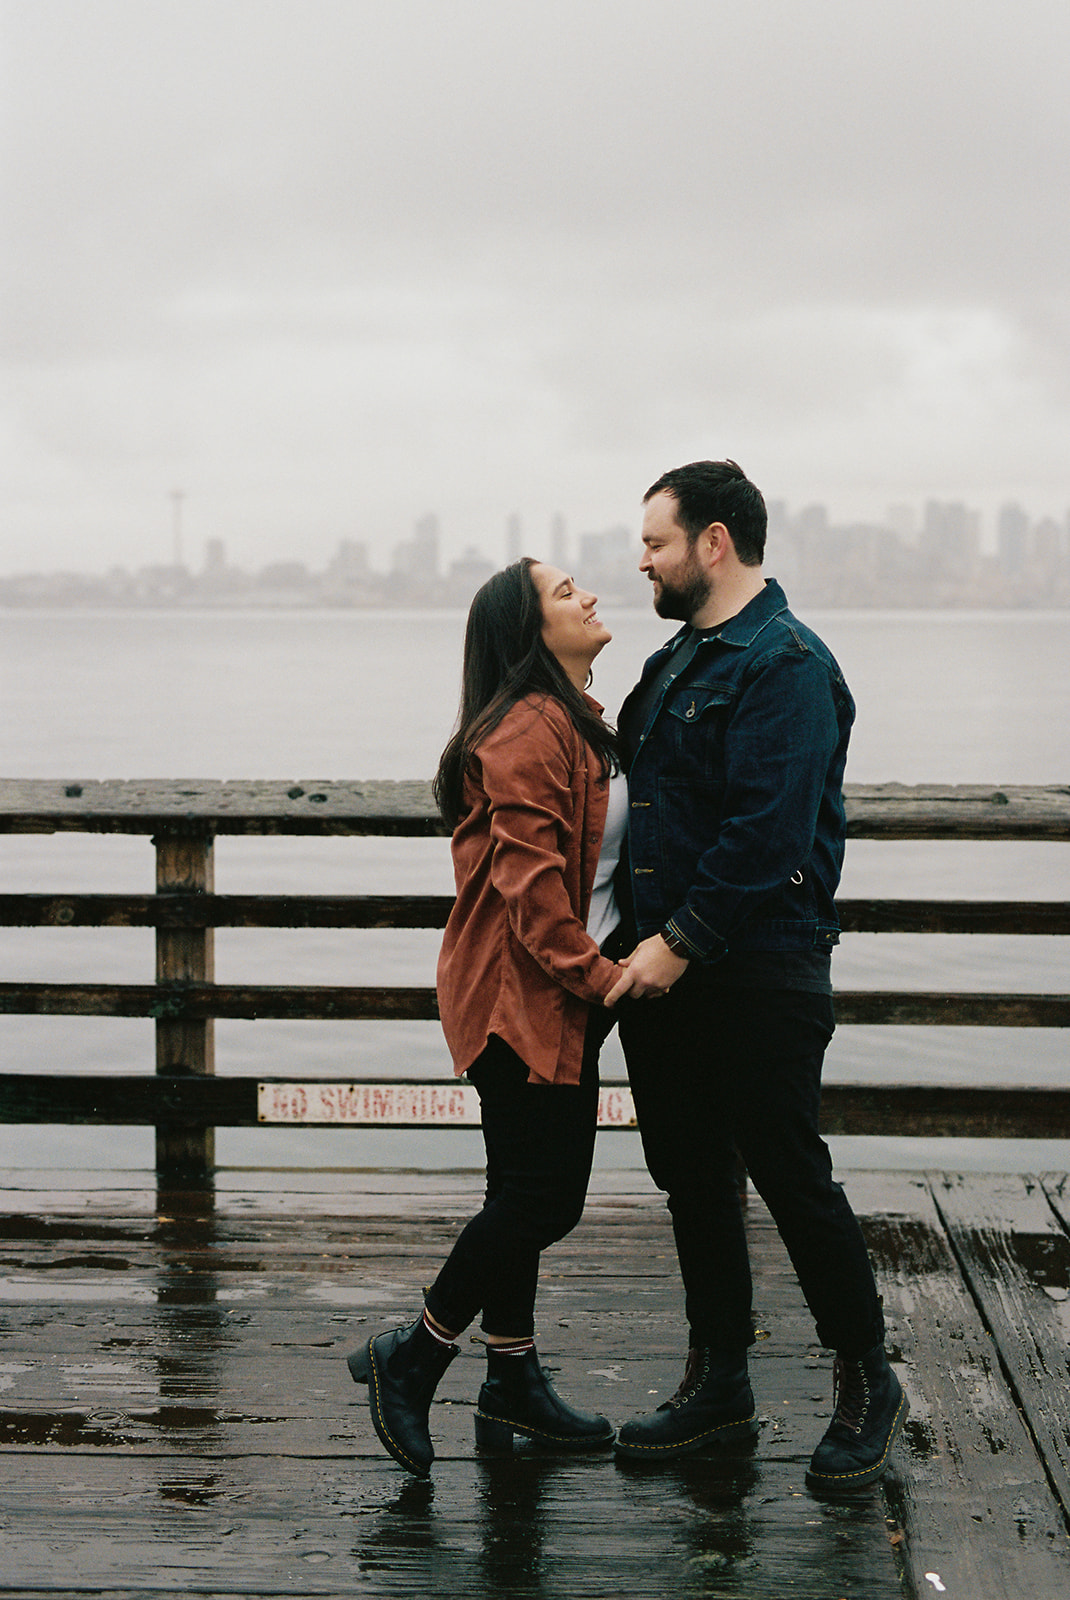 portra 400 photograph of a couple embracing on a rainy day on a pier